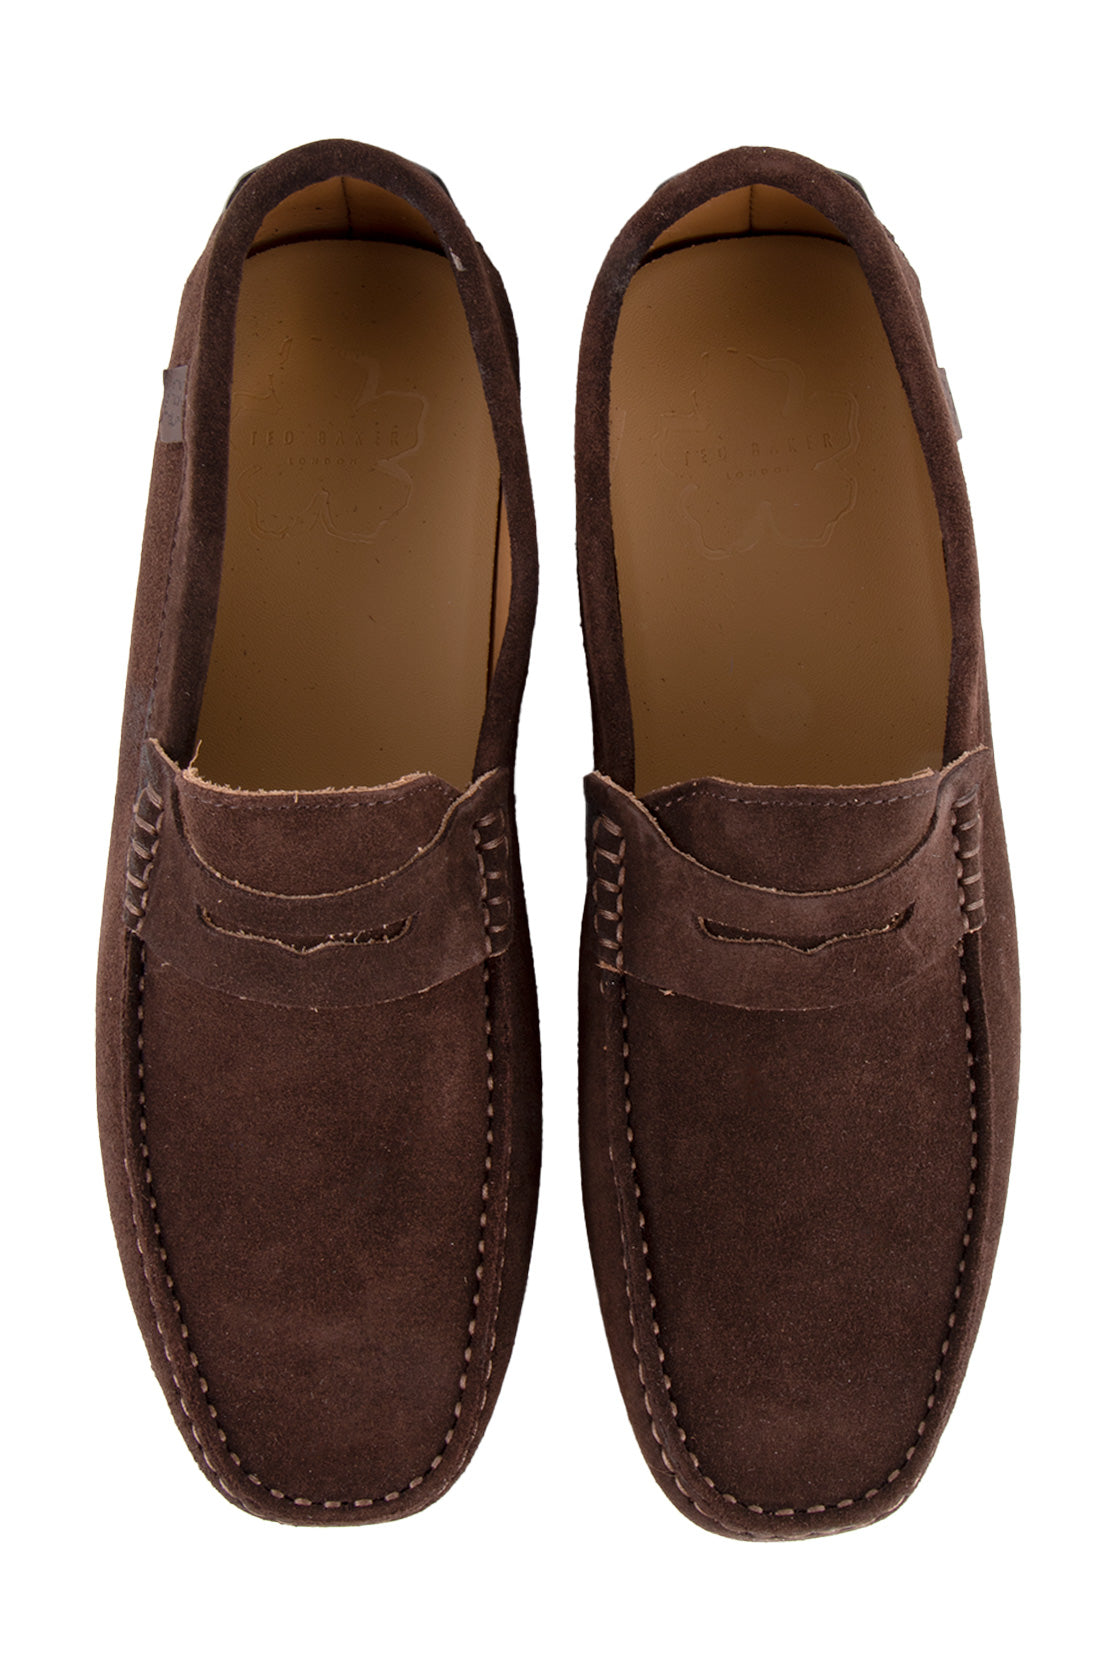 Ted Baker Allbert Suede Driving Shoes Chocolate